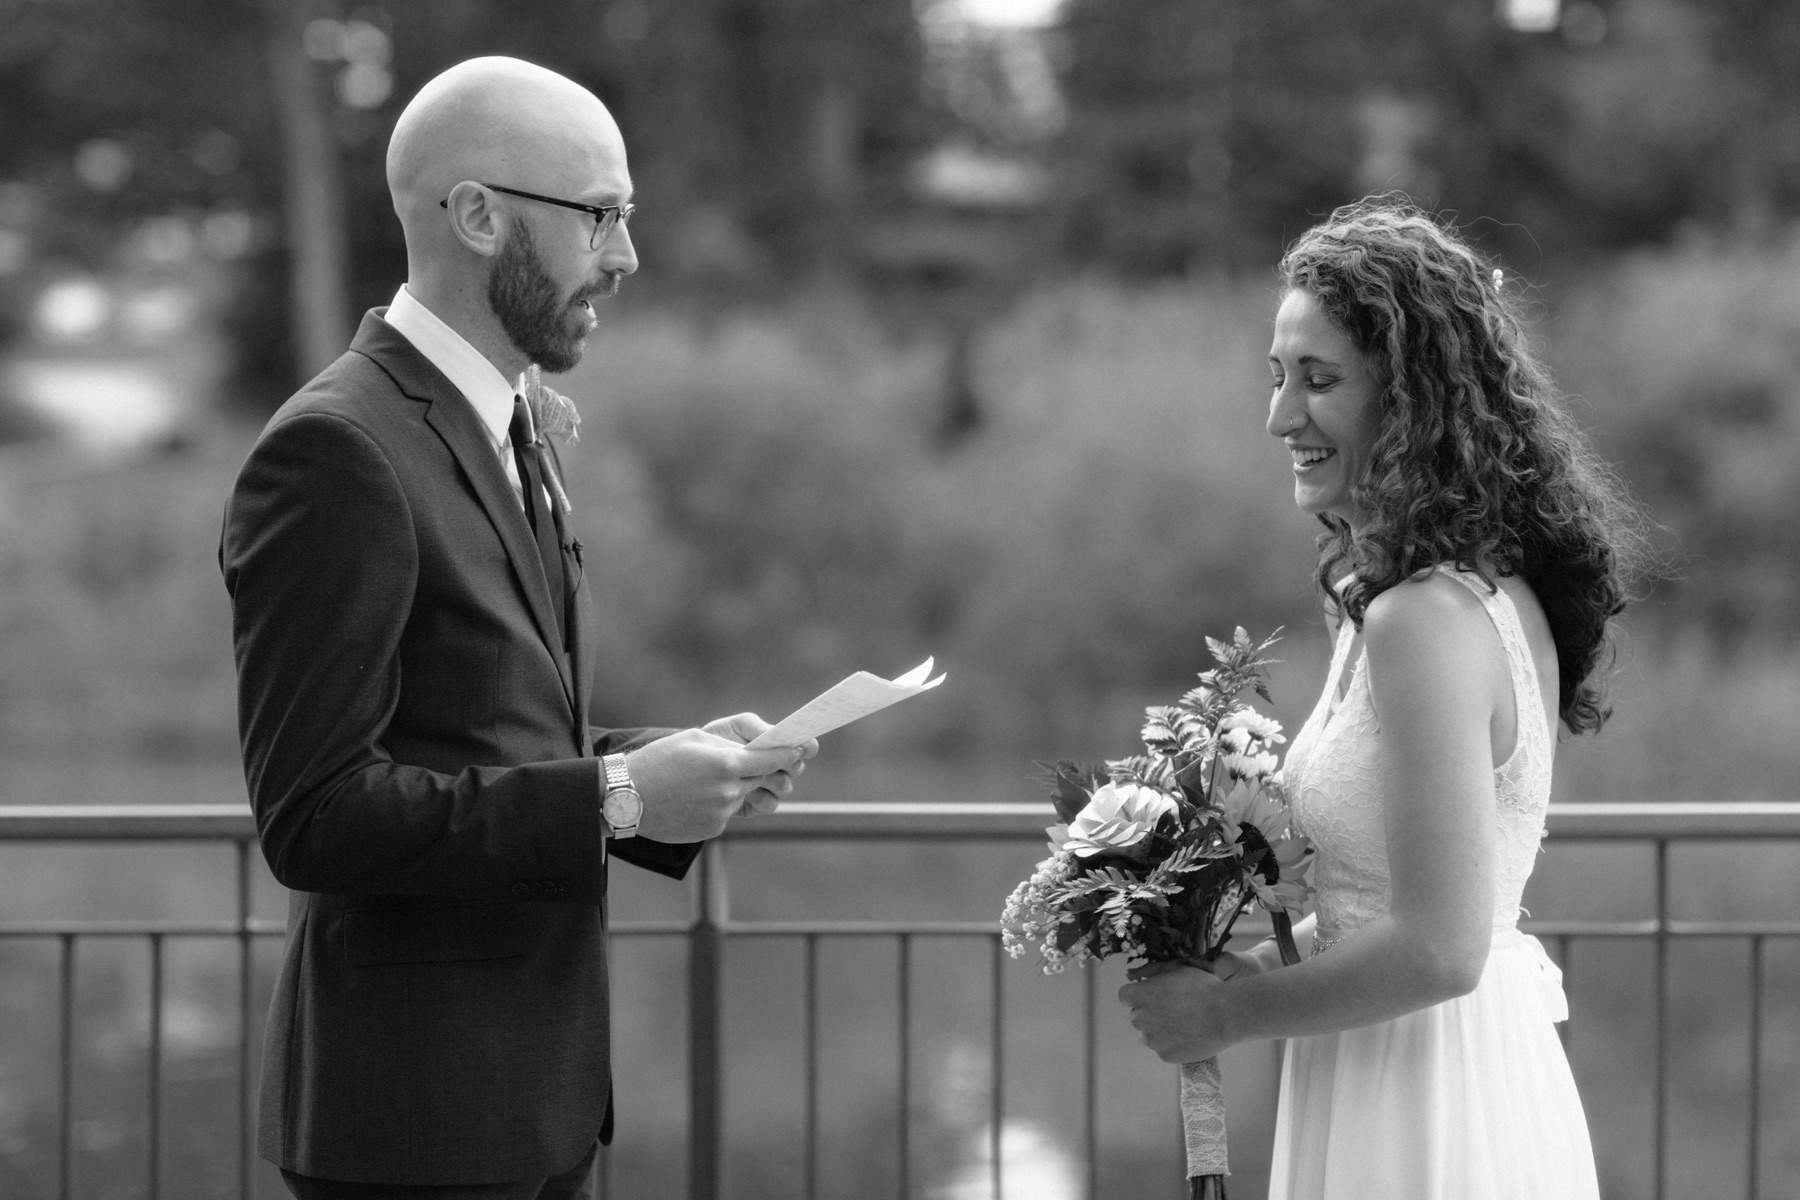 An intimate COVID wedding at Confederation Park in Calgary overlooking the pond